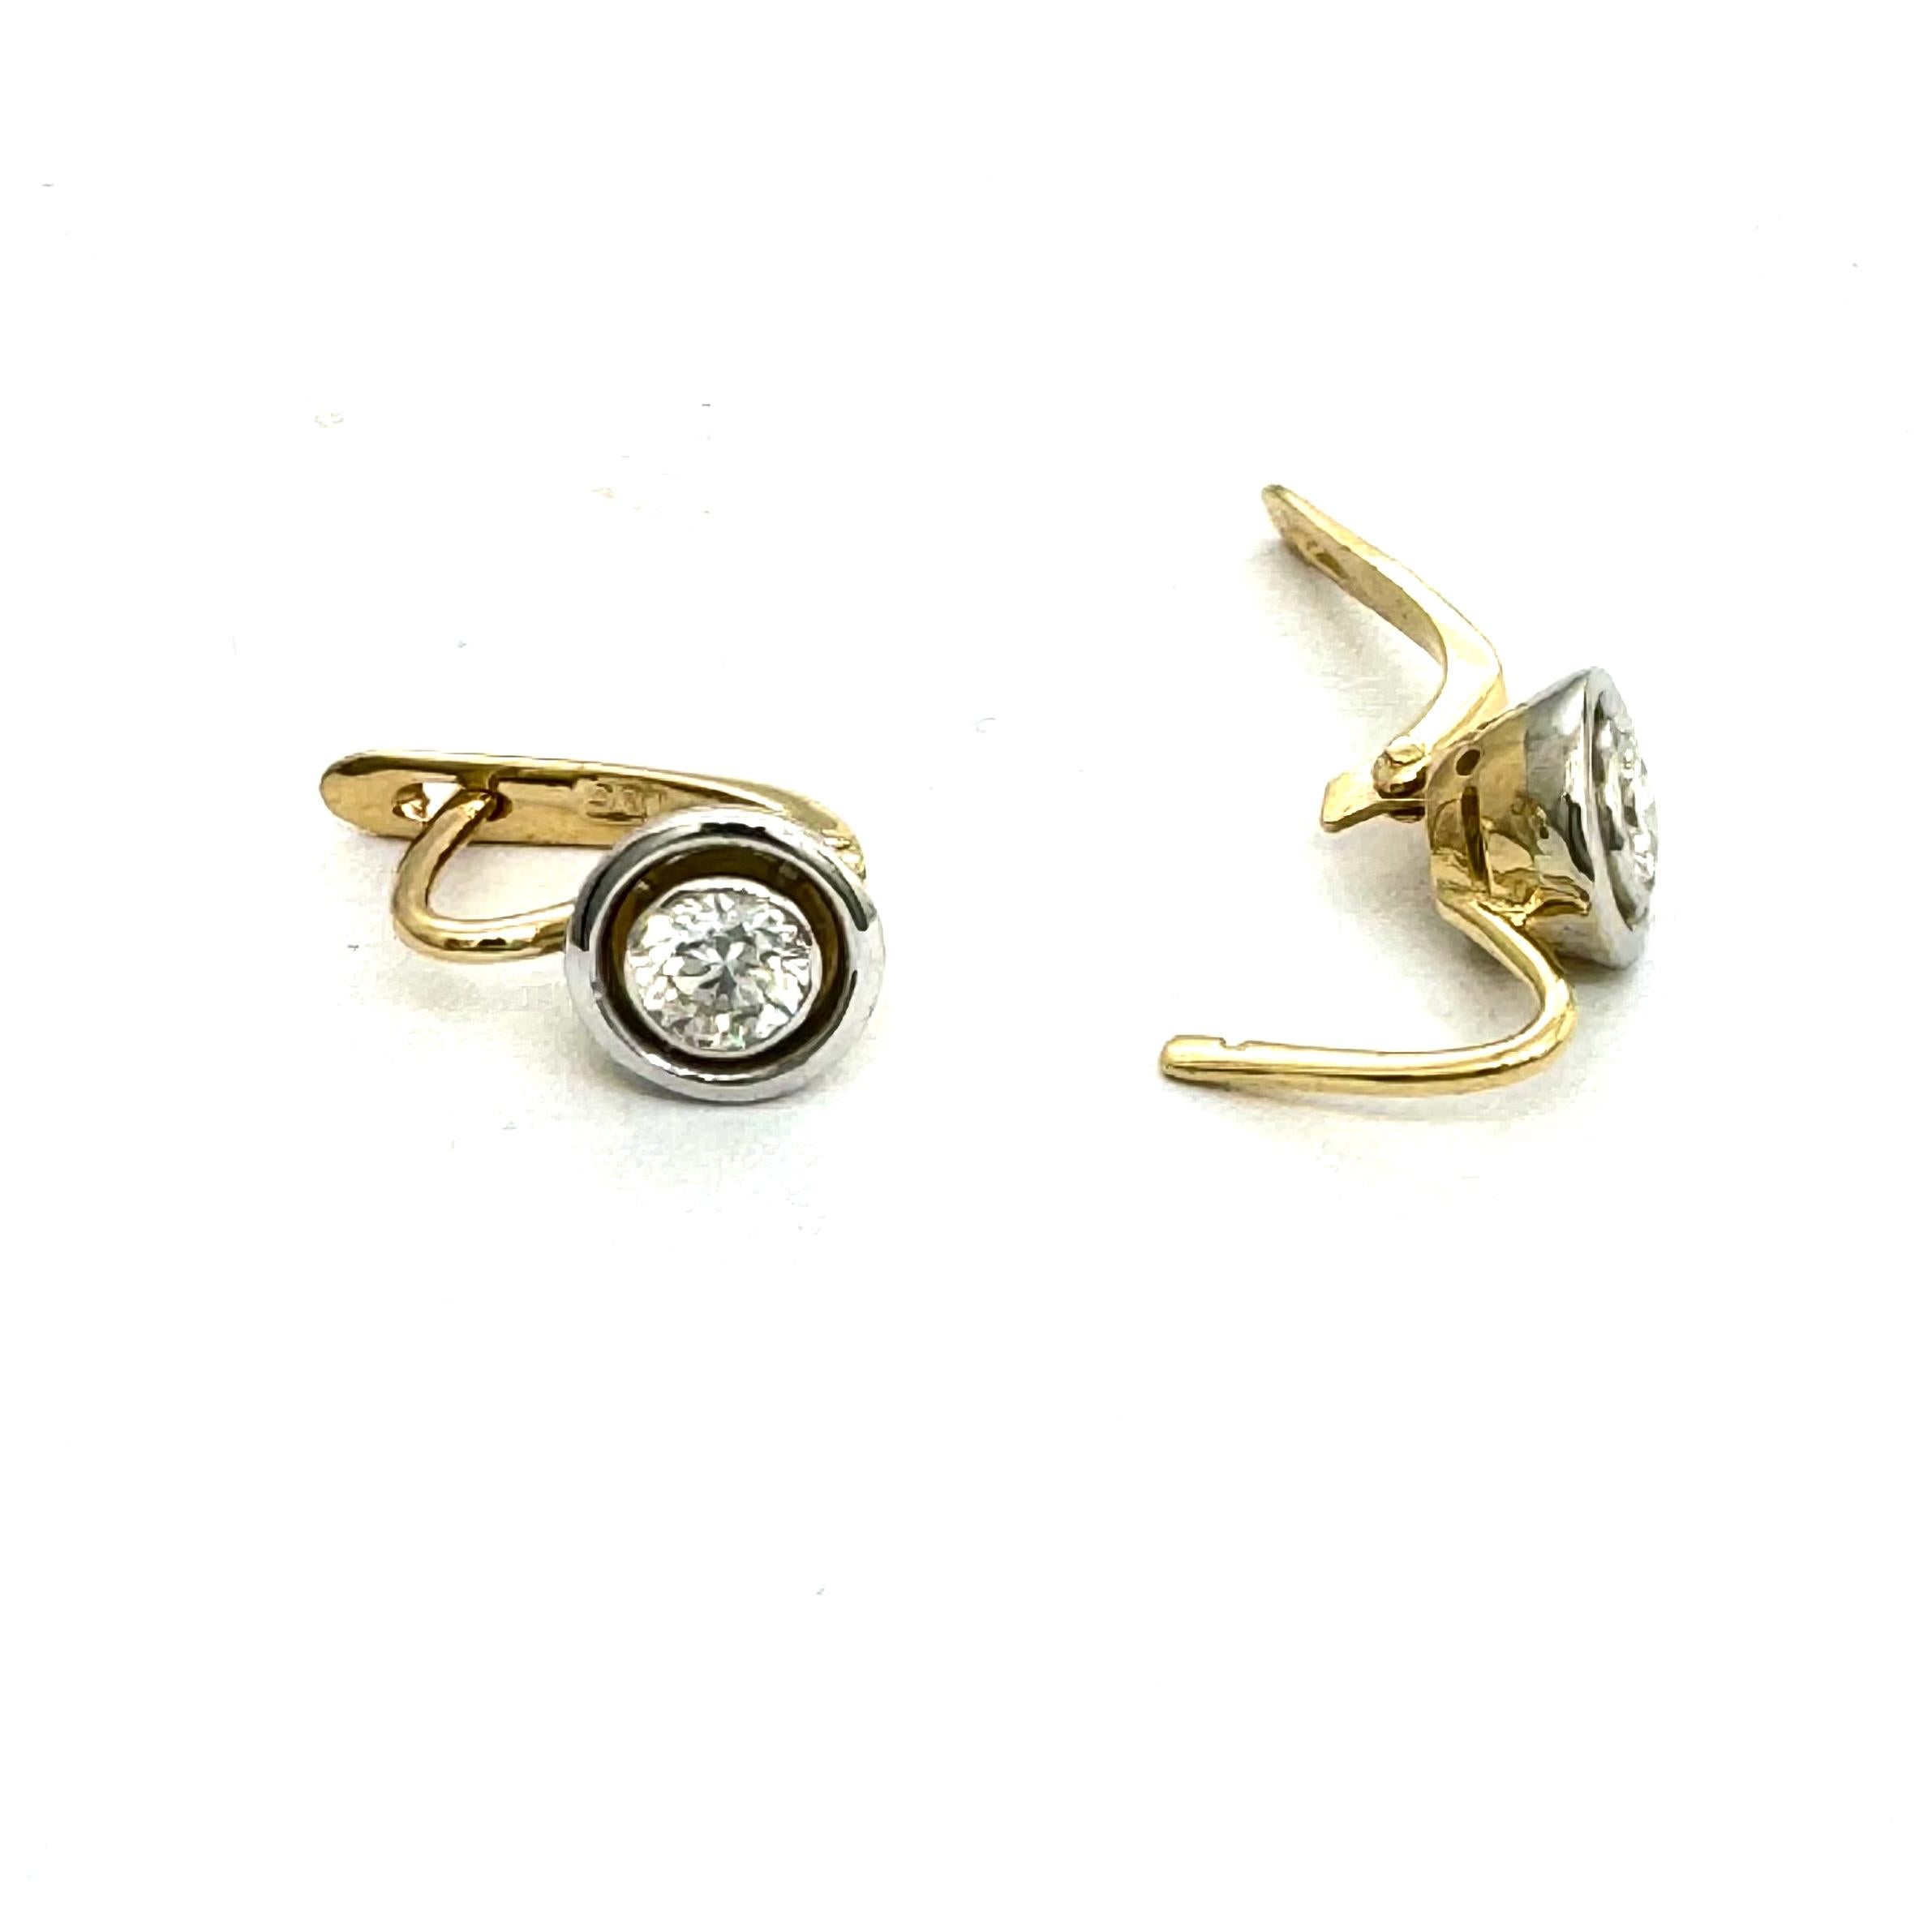 Classic 18 carat yellow gold earrings with safe Victorian clipping locks.
Two round brilliant cut diamonds set in 18 carat white gold rub-over setting with a double bezel.
Diamond weight estimated totalling 0.70 carats
Estimated clarity VS , colour